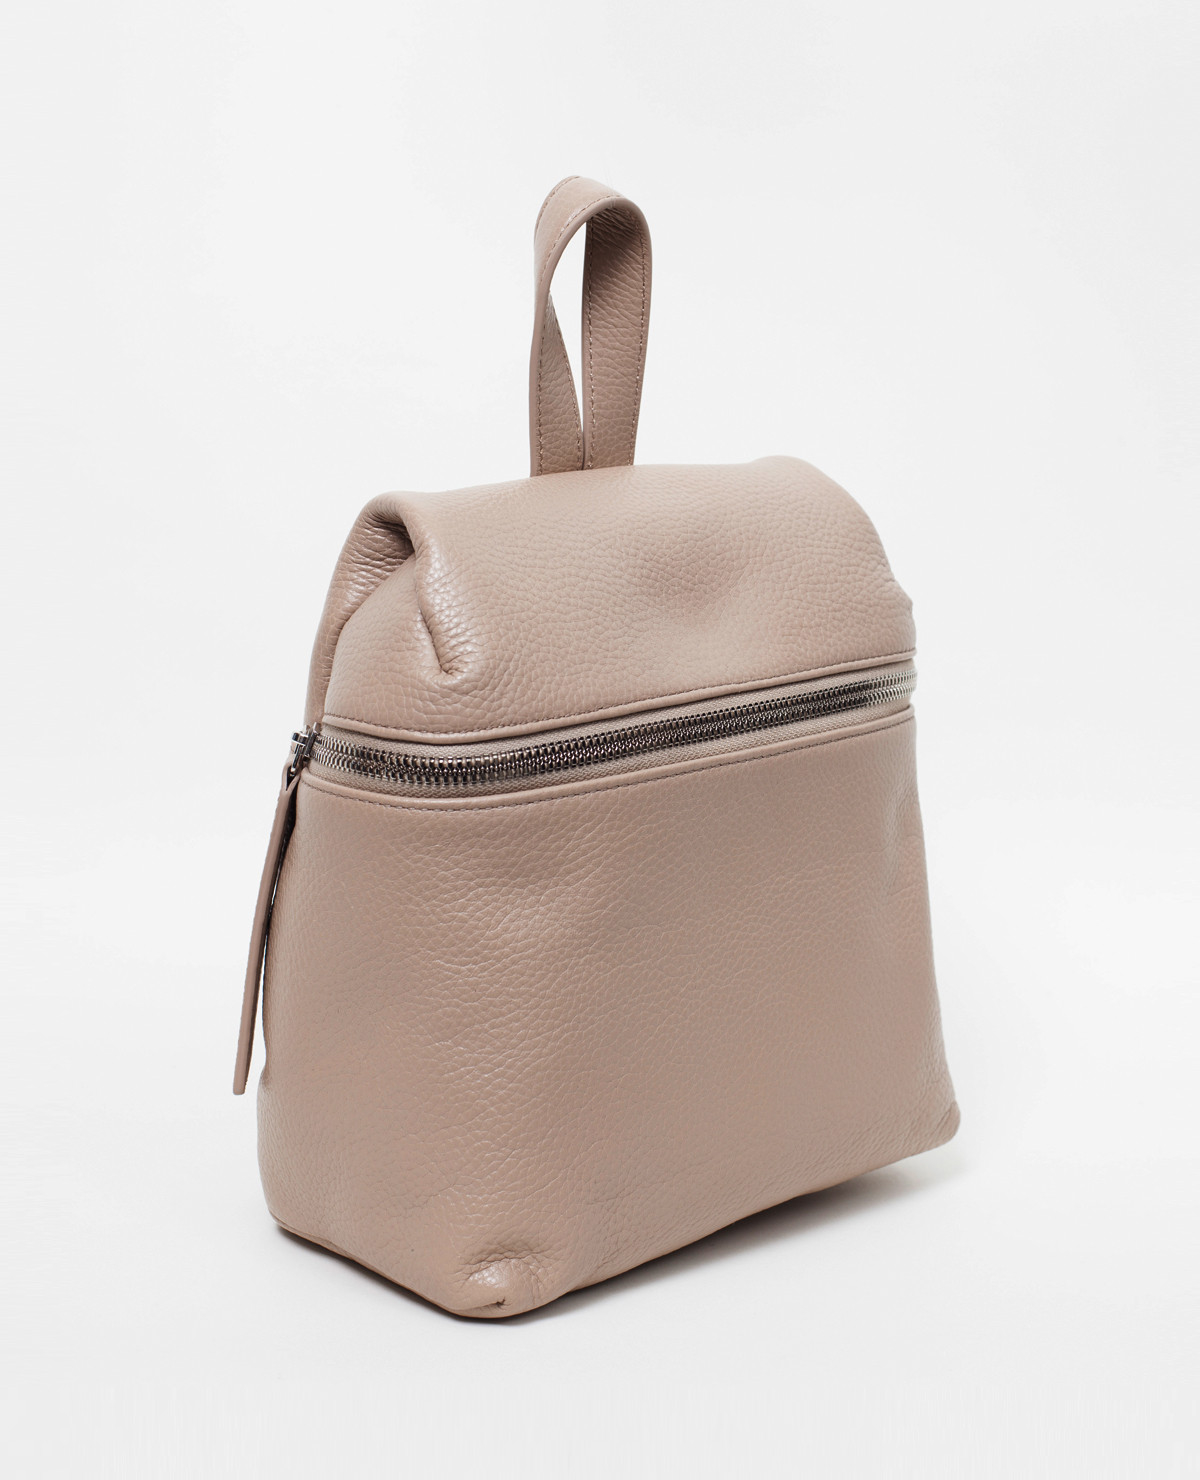 Kara bags Kara Small Pebble Leather Backpack / Taupe in Brown (Taupe ...